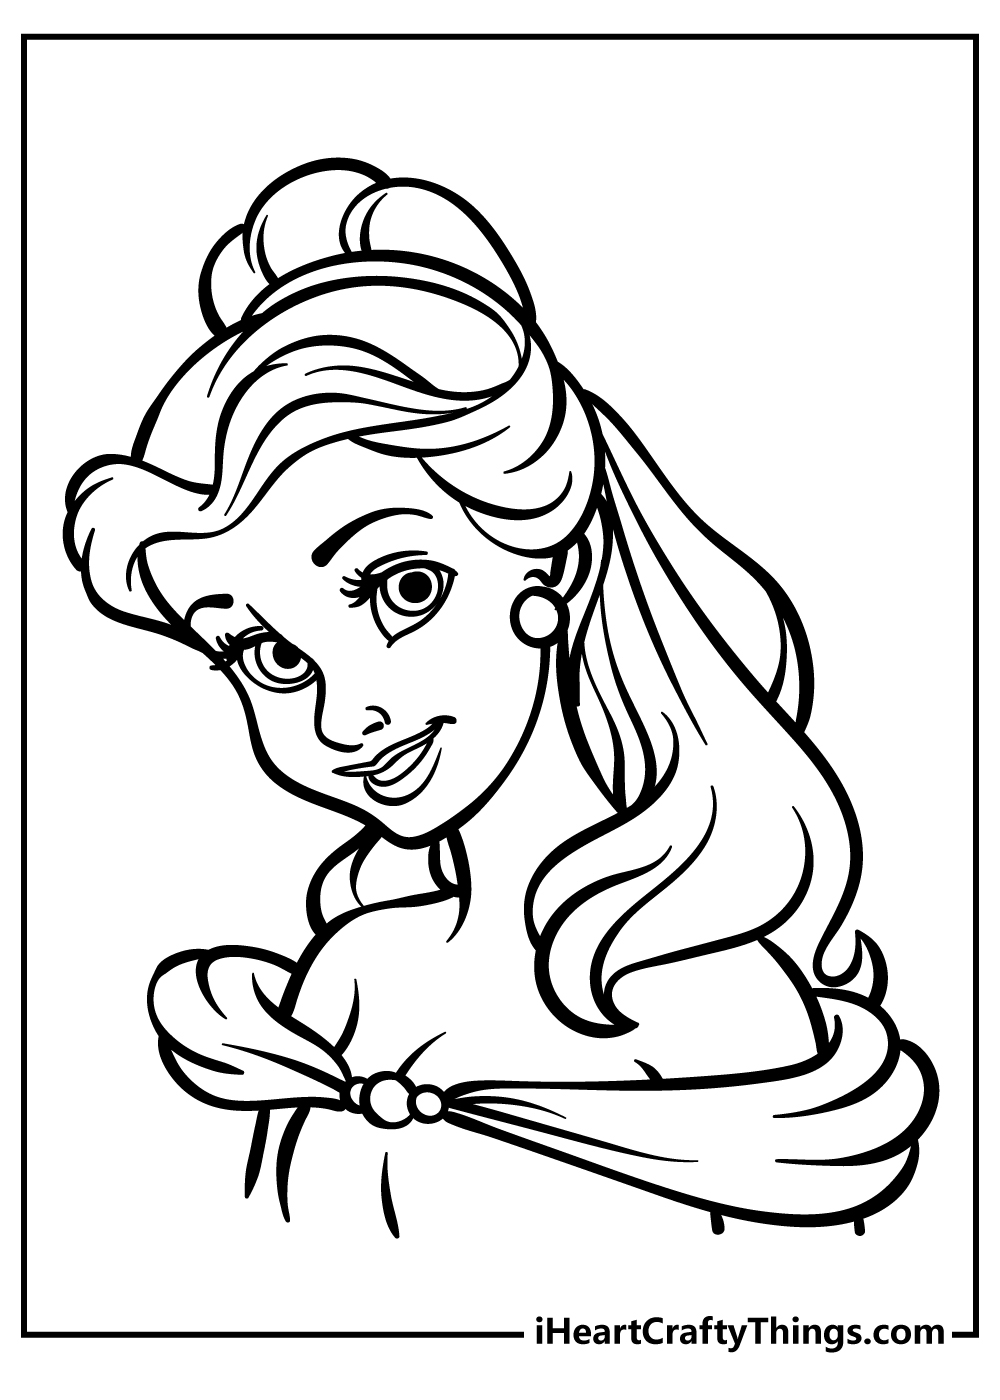 Belle Coloring Book for adults free download